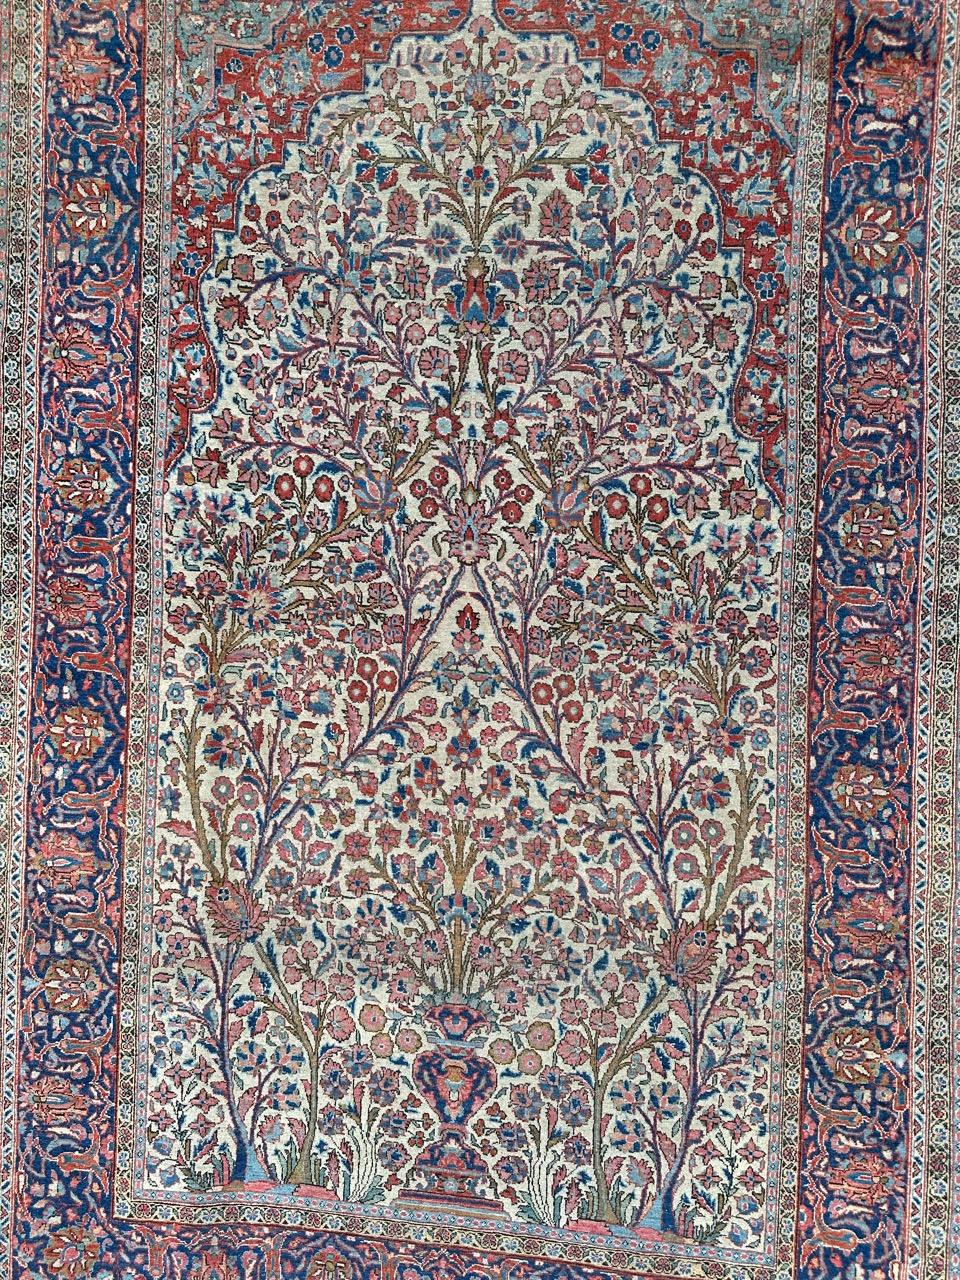 A stunning early 20th-century Kashan rug featuring a beautiful floral design and exquisite natural colors. This rug is a masterpiece of craftsmanship, entirely and finely hand-knotted with wool velvet on a cotton foundation.

While it's important to